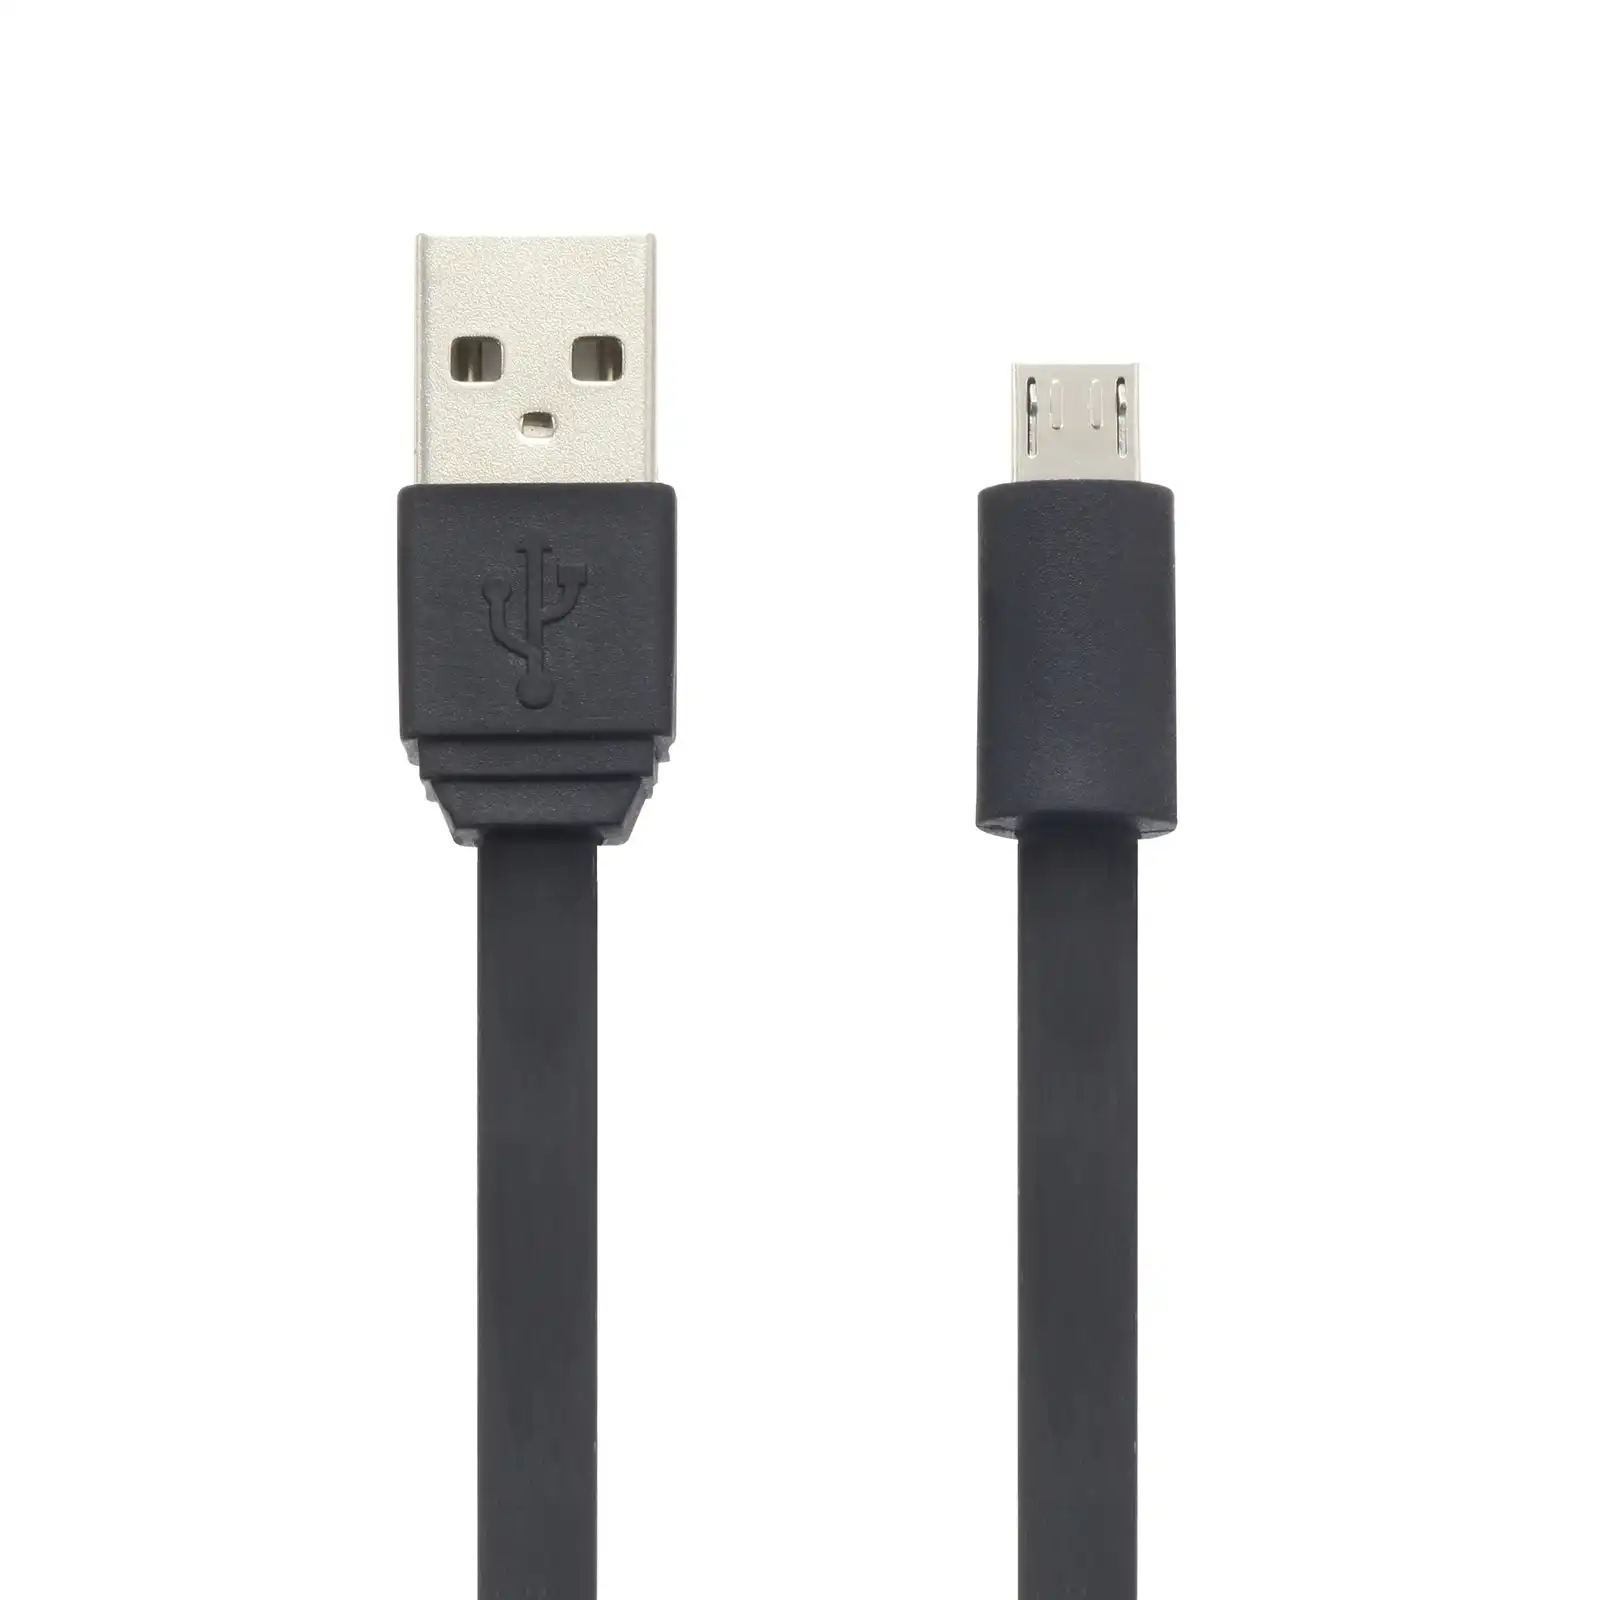 Moki 1.5m MicroUSB Sync/Charge Cable for Phone/Device to Power Adaptor/PC Black